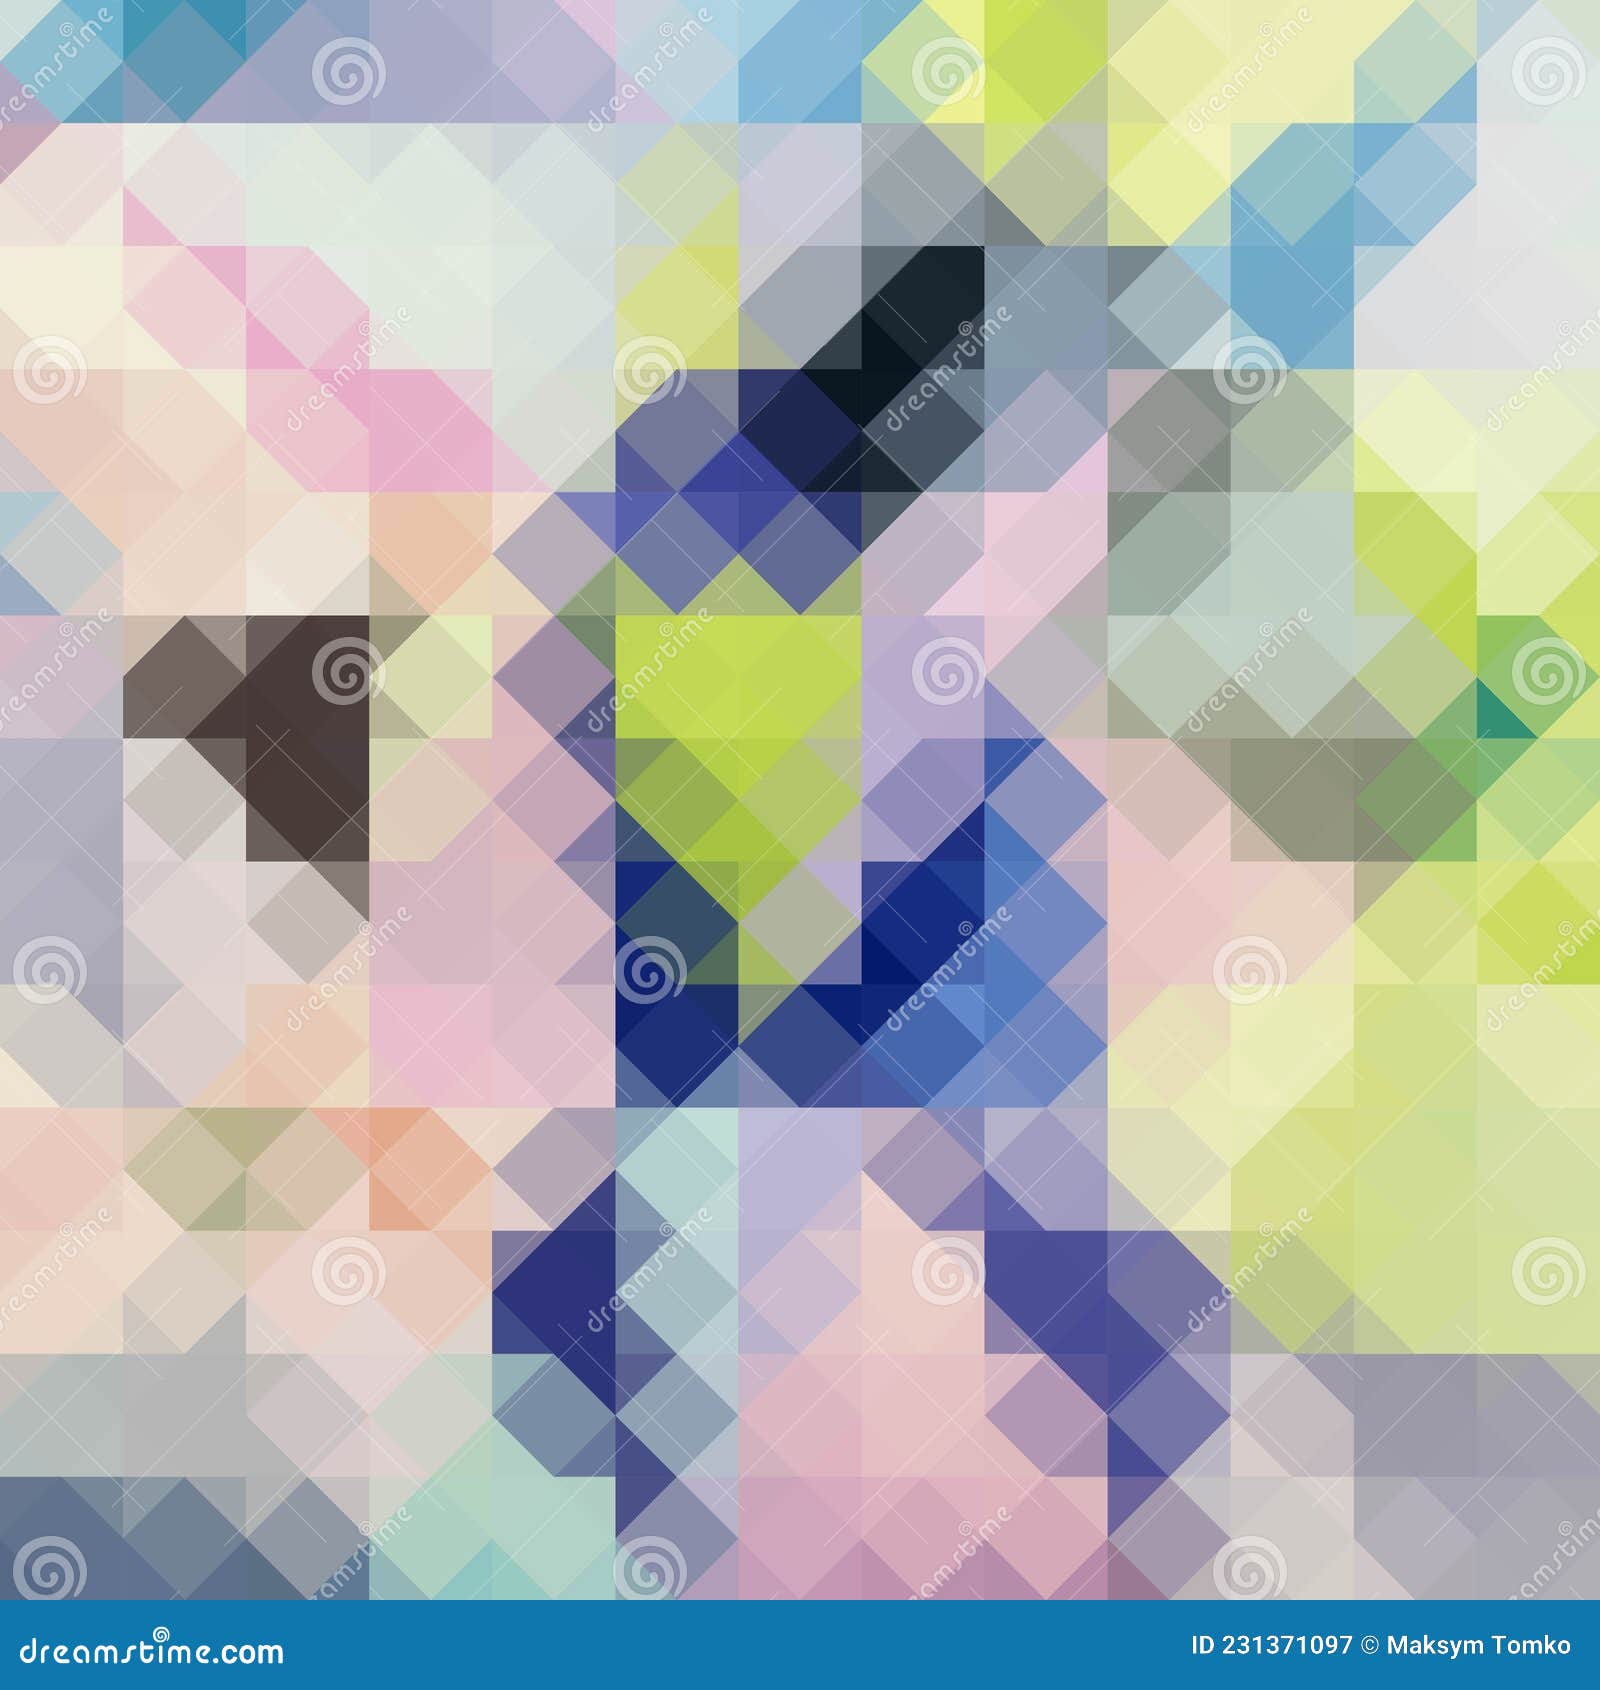 mosaic pattern, geometric chaotic tiling  background for wallpapers, wrapping paper or website backgrounds. eps 10